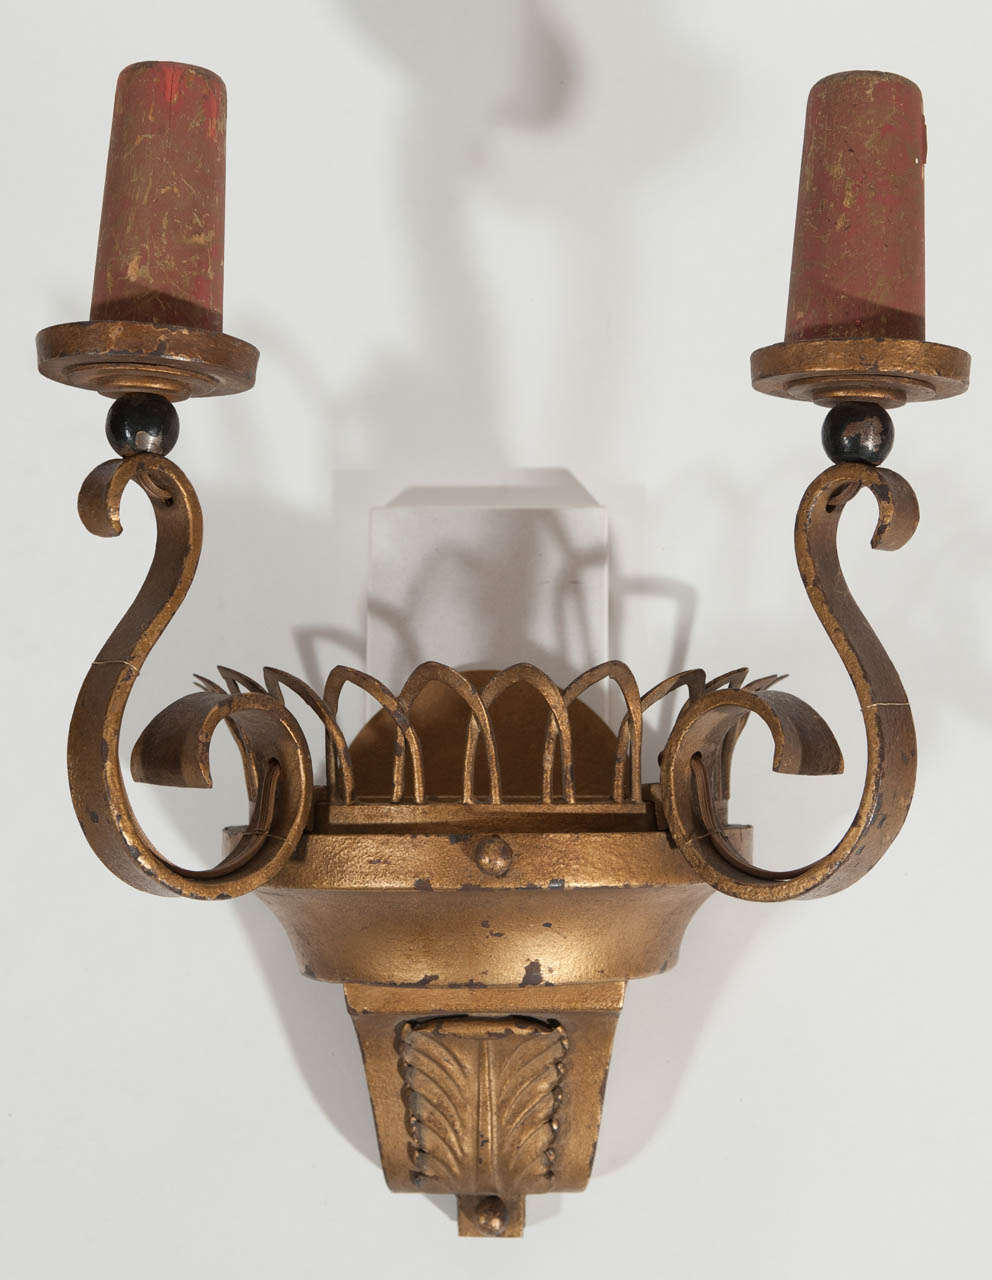 Pair of 1940's styled metal sconces with original goldgilt finish.
Also retaining original red slightly marbelized candlecovers.
Rewired to North America standards.